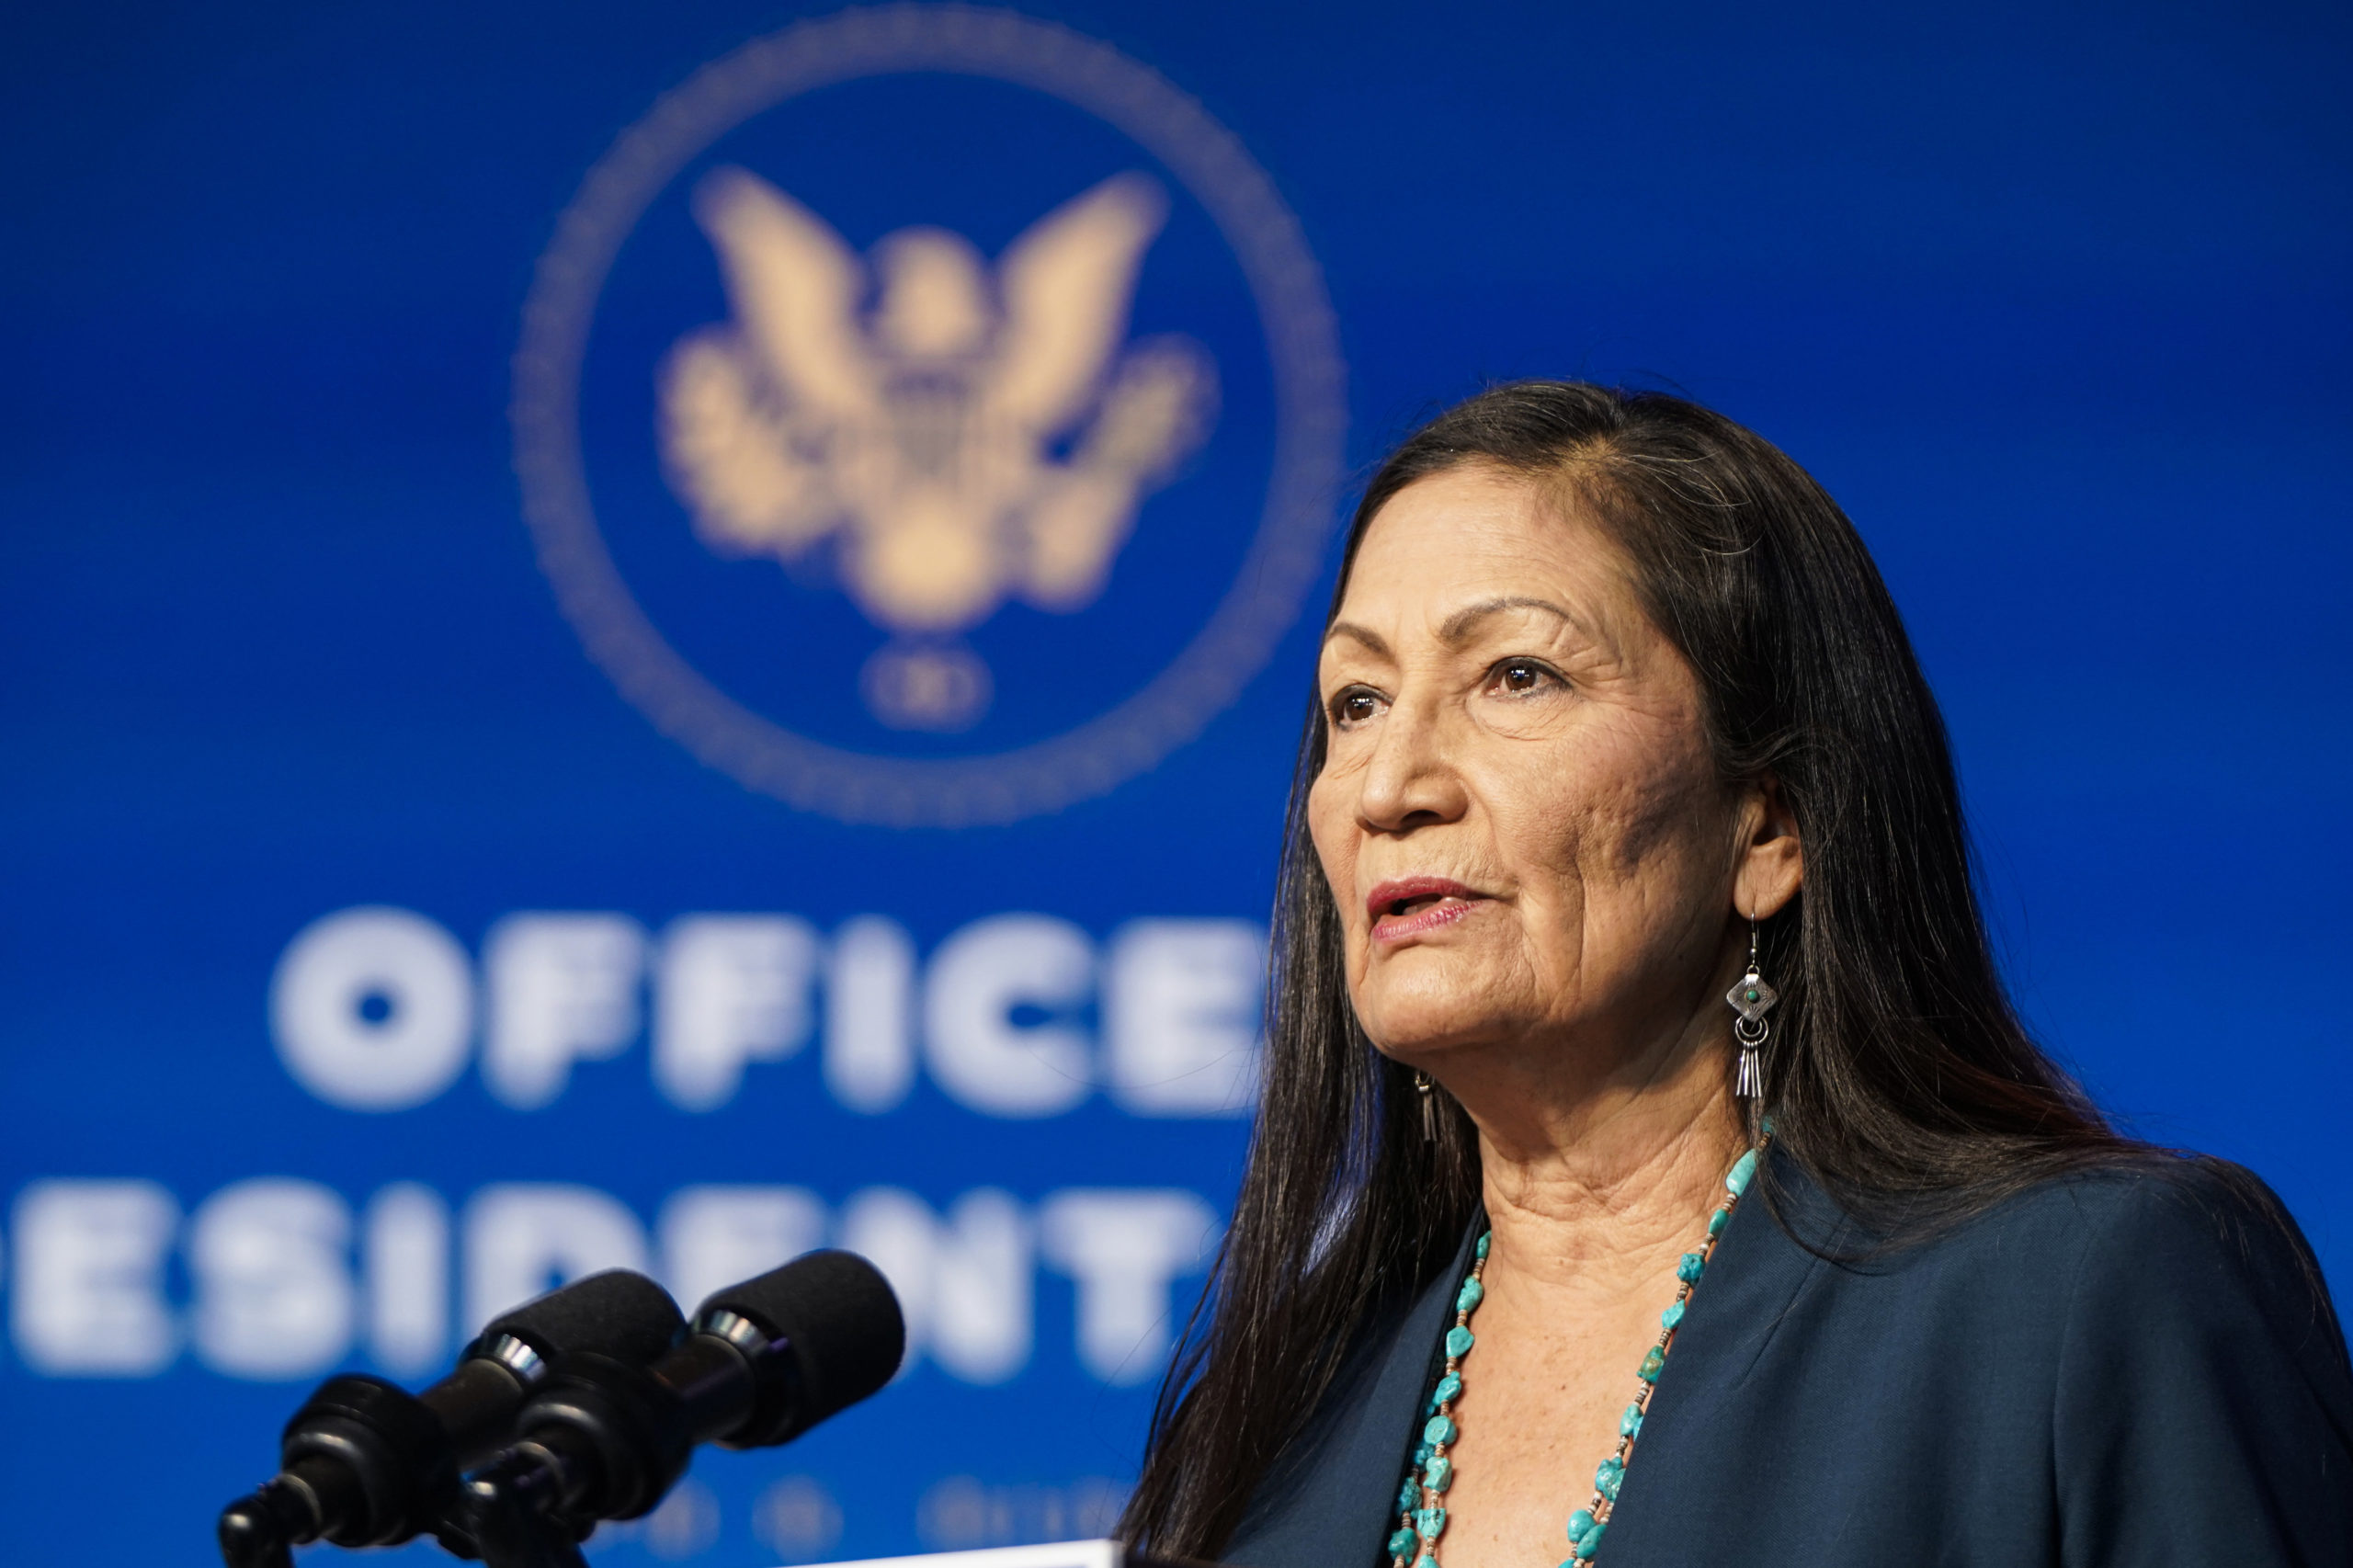 WILMINGTON, DE - DECEMBER 19: Nominee for Secretary of Interior, Congresswoman Deb Haaland, speaks after President-elect Joe Biden announced his climate and energy appointments at the Queen theater on December 19, 2020 in Wilmington, Delaware. Haaland is the first Native American nominated to serve on the presidential cabinet. (Photo by Joshua Roberts/Getty Images)